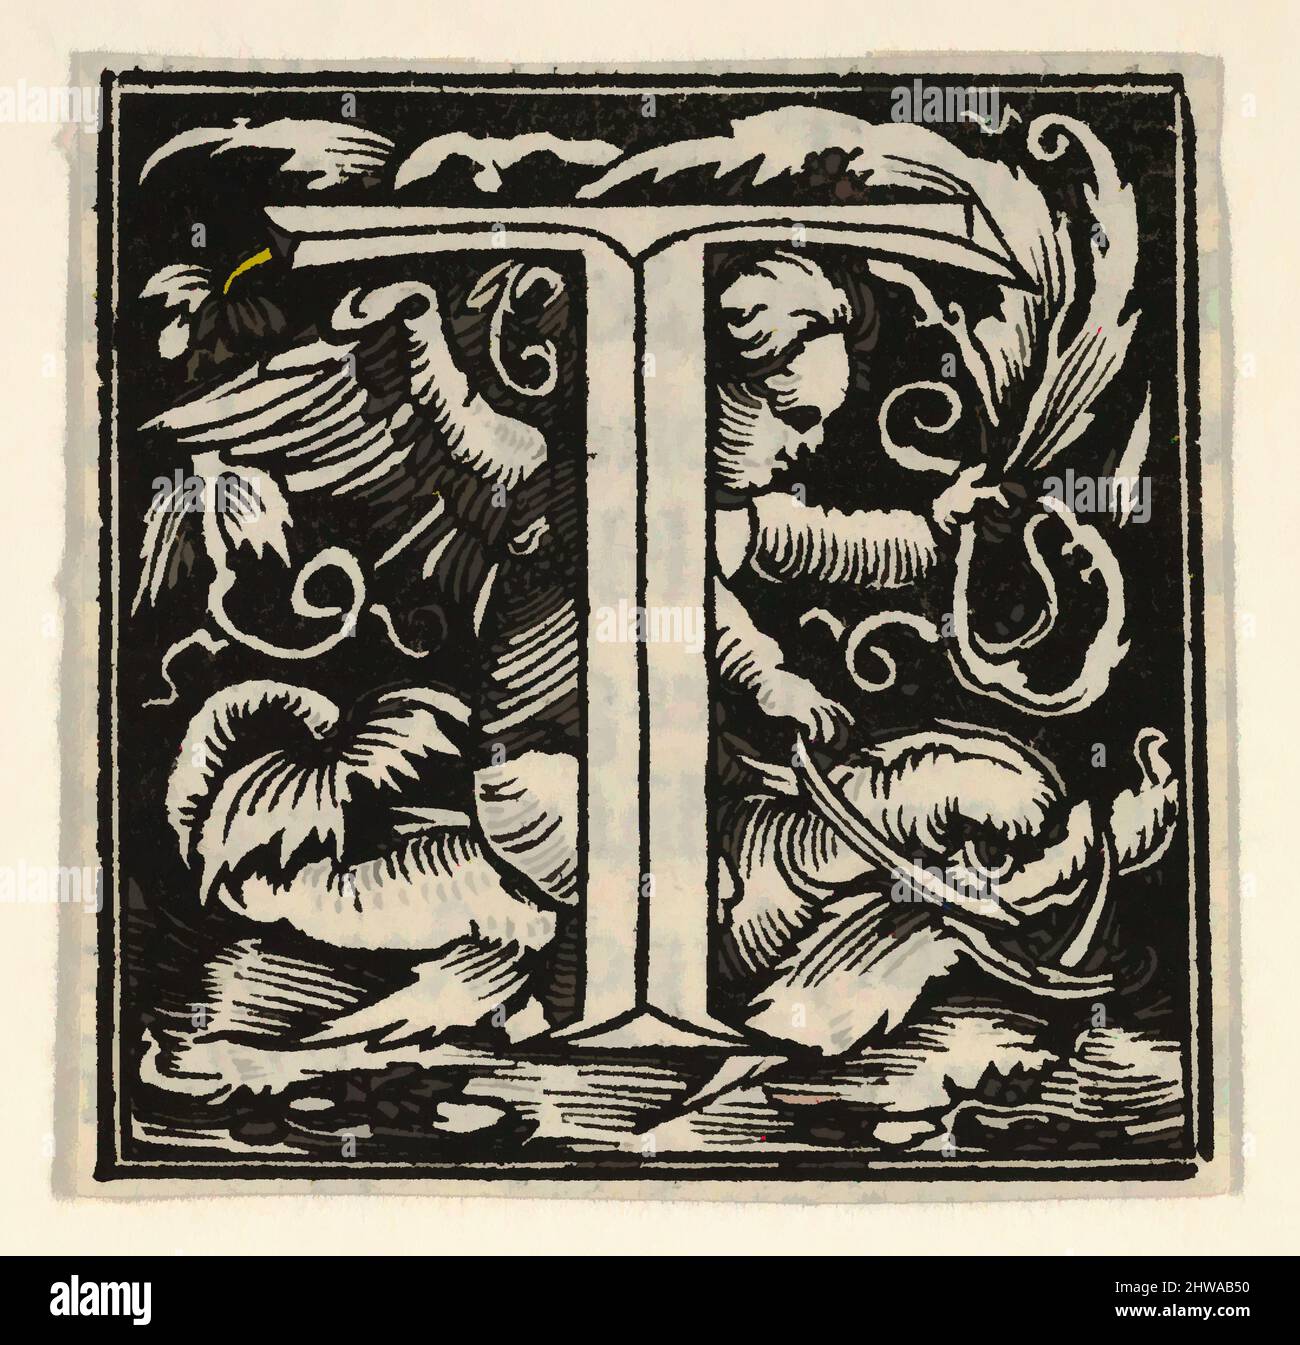 Art inspired by Drawings and Prints, Print, Initial letter T with putto, Artist, Heinrich Vogtherr the Elder, German, born 1490, active 1538, Classic works modernized by Artotop with a splash of modernity. Shapes, color and value, eye-catching visual impact on art. Emotions through freedom of artworks in a contemporary way. A timeless message pursuing a wildly creative new direction. Artists turning to the digital medium and creating the Artotop NFT Stock Photo